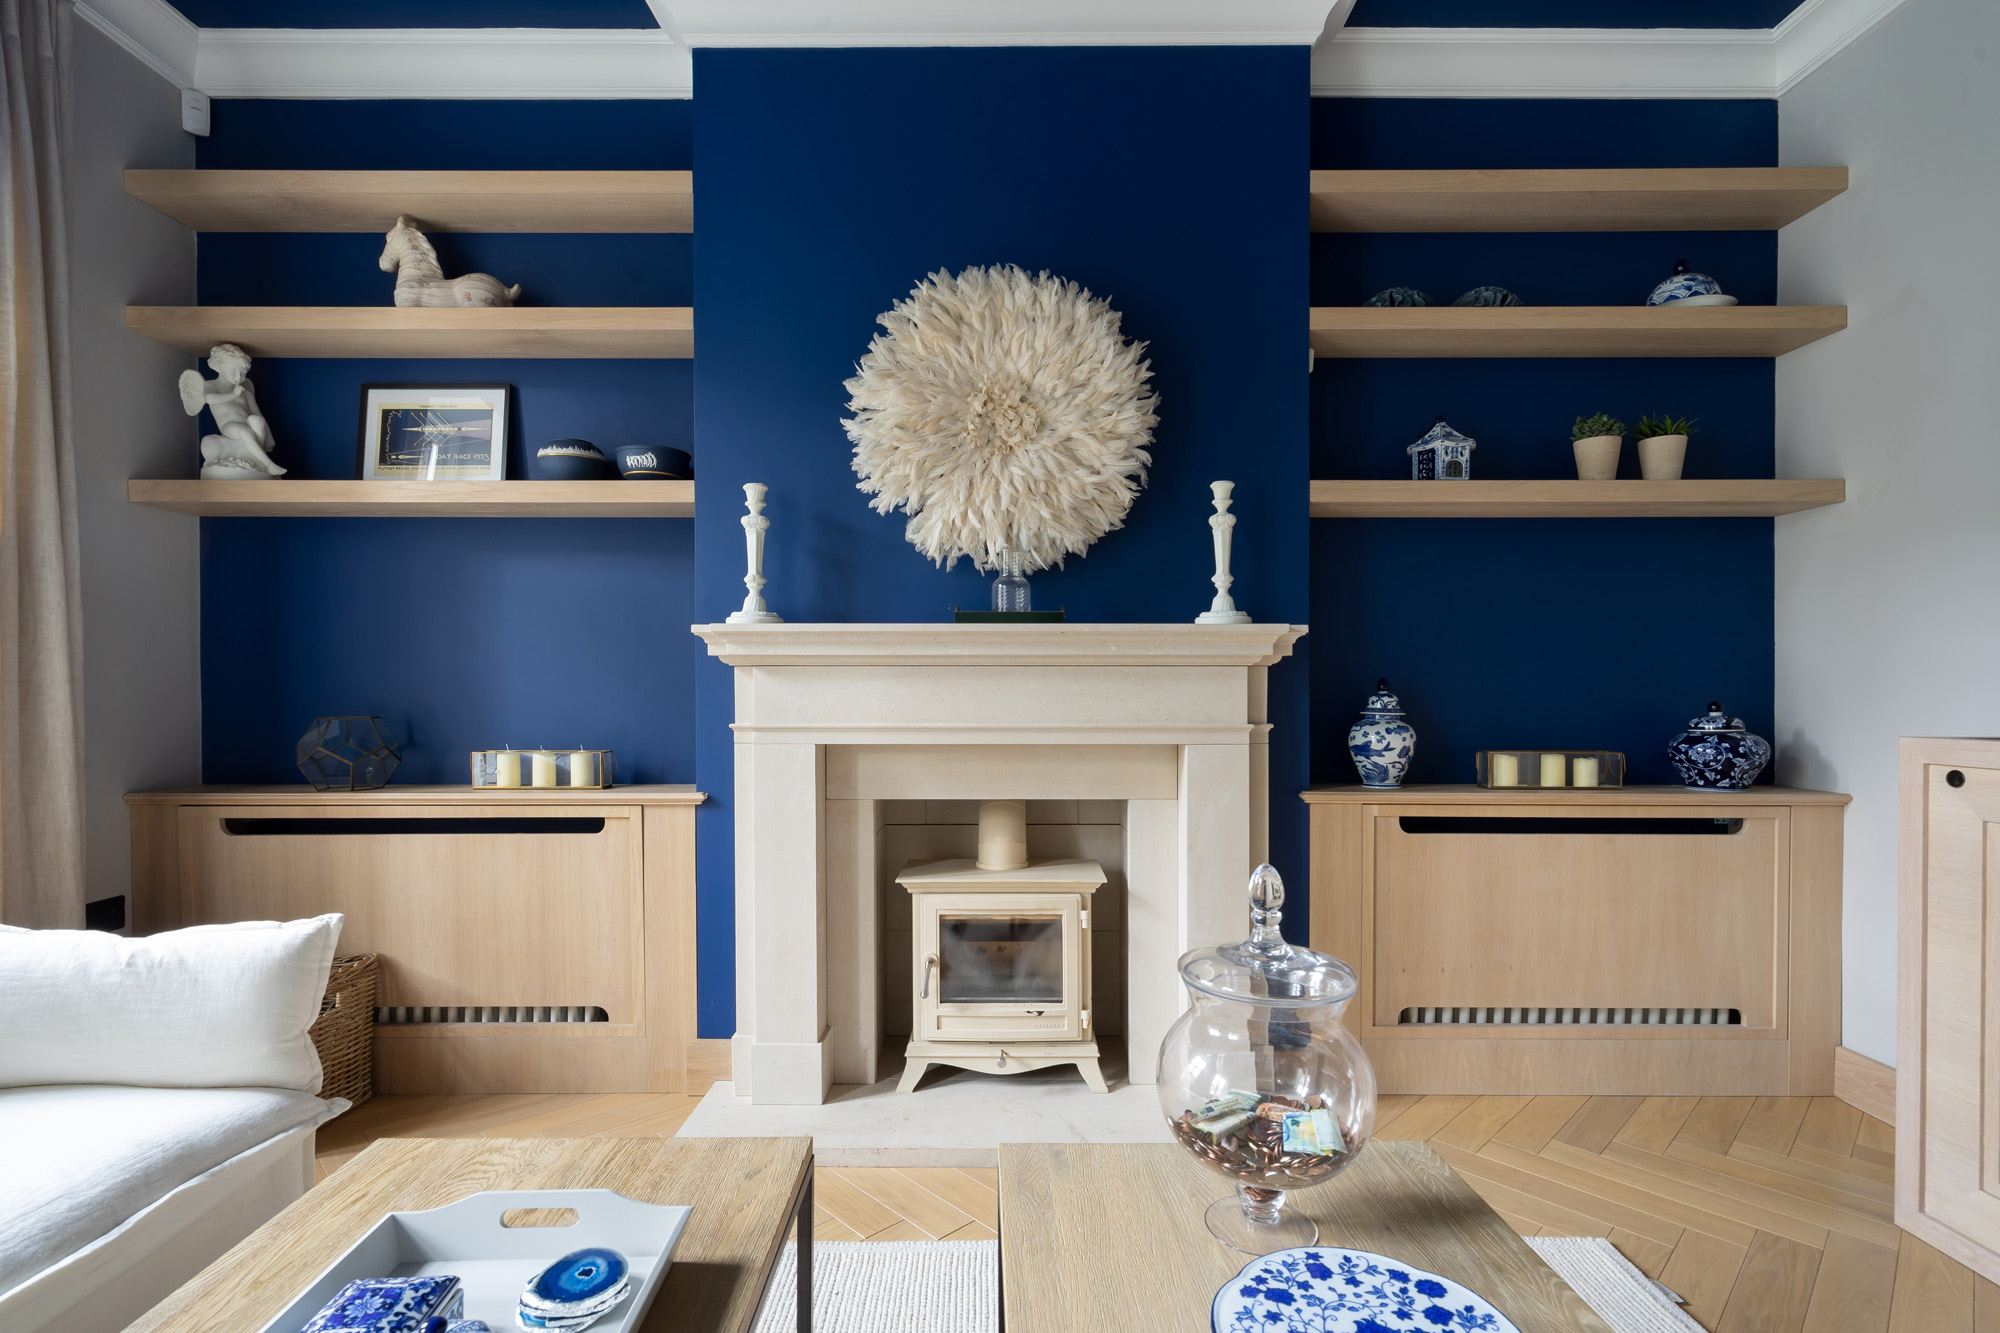 Fireplace and blue wall Astell Street SW3 Chelsea